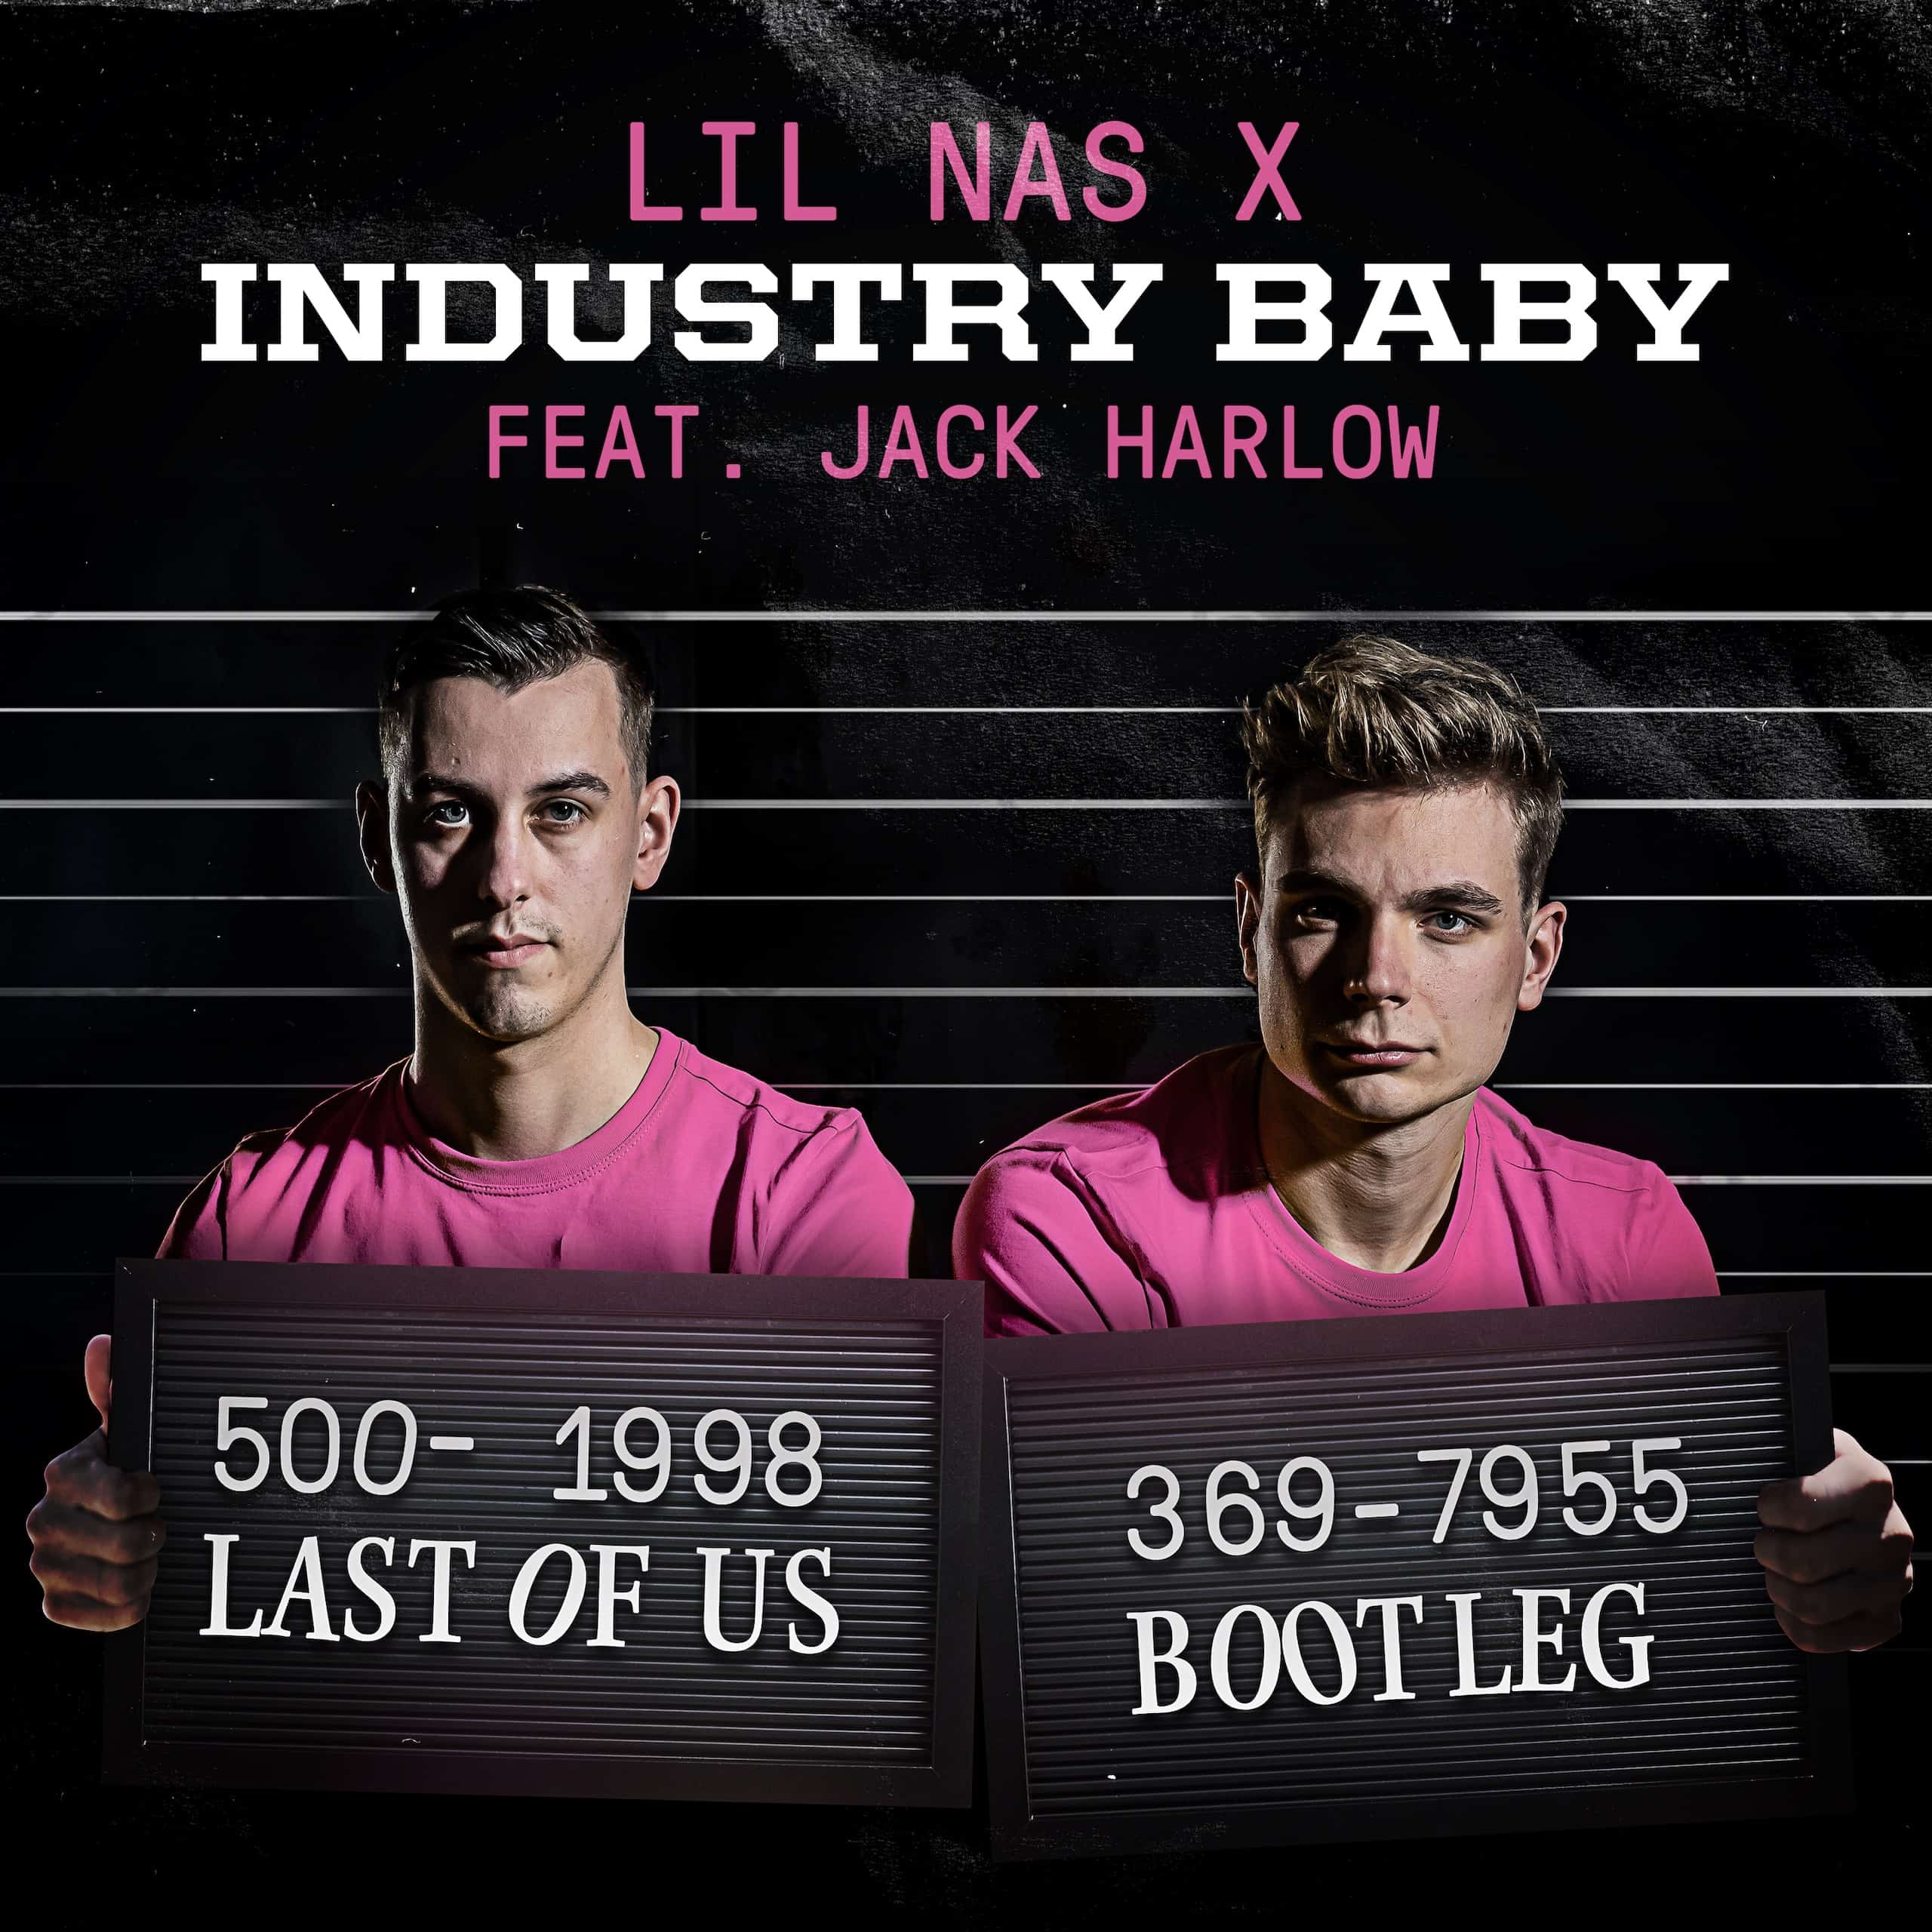 Текст industry baby. Jack Harlow industry Baby. Lil nas x, Jack Harlow - industry Baby. Lil nas Jack Harlow industry. Industry Baby обложка.